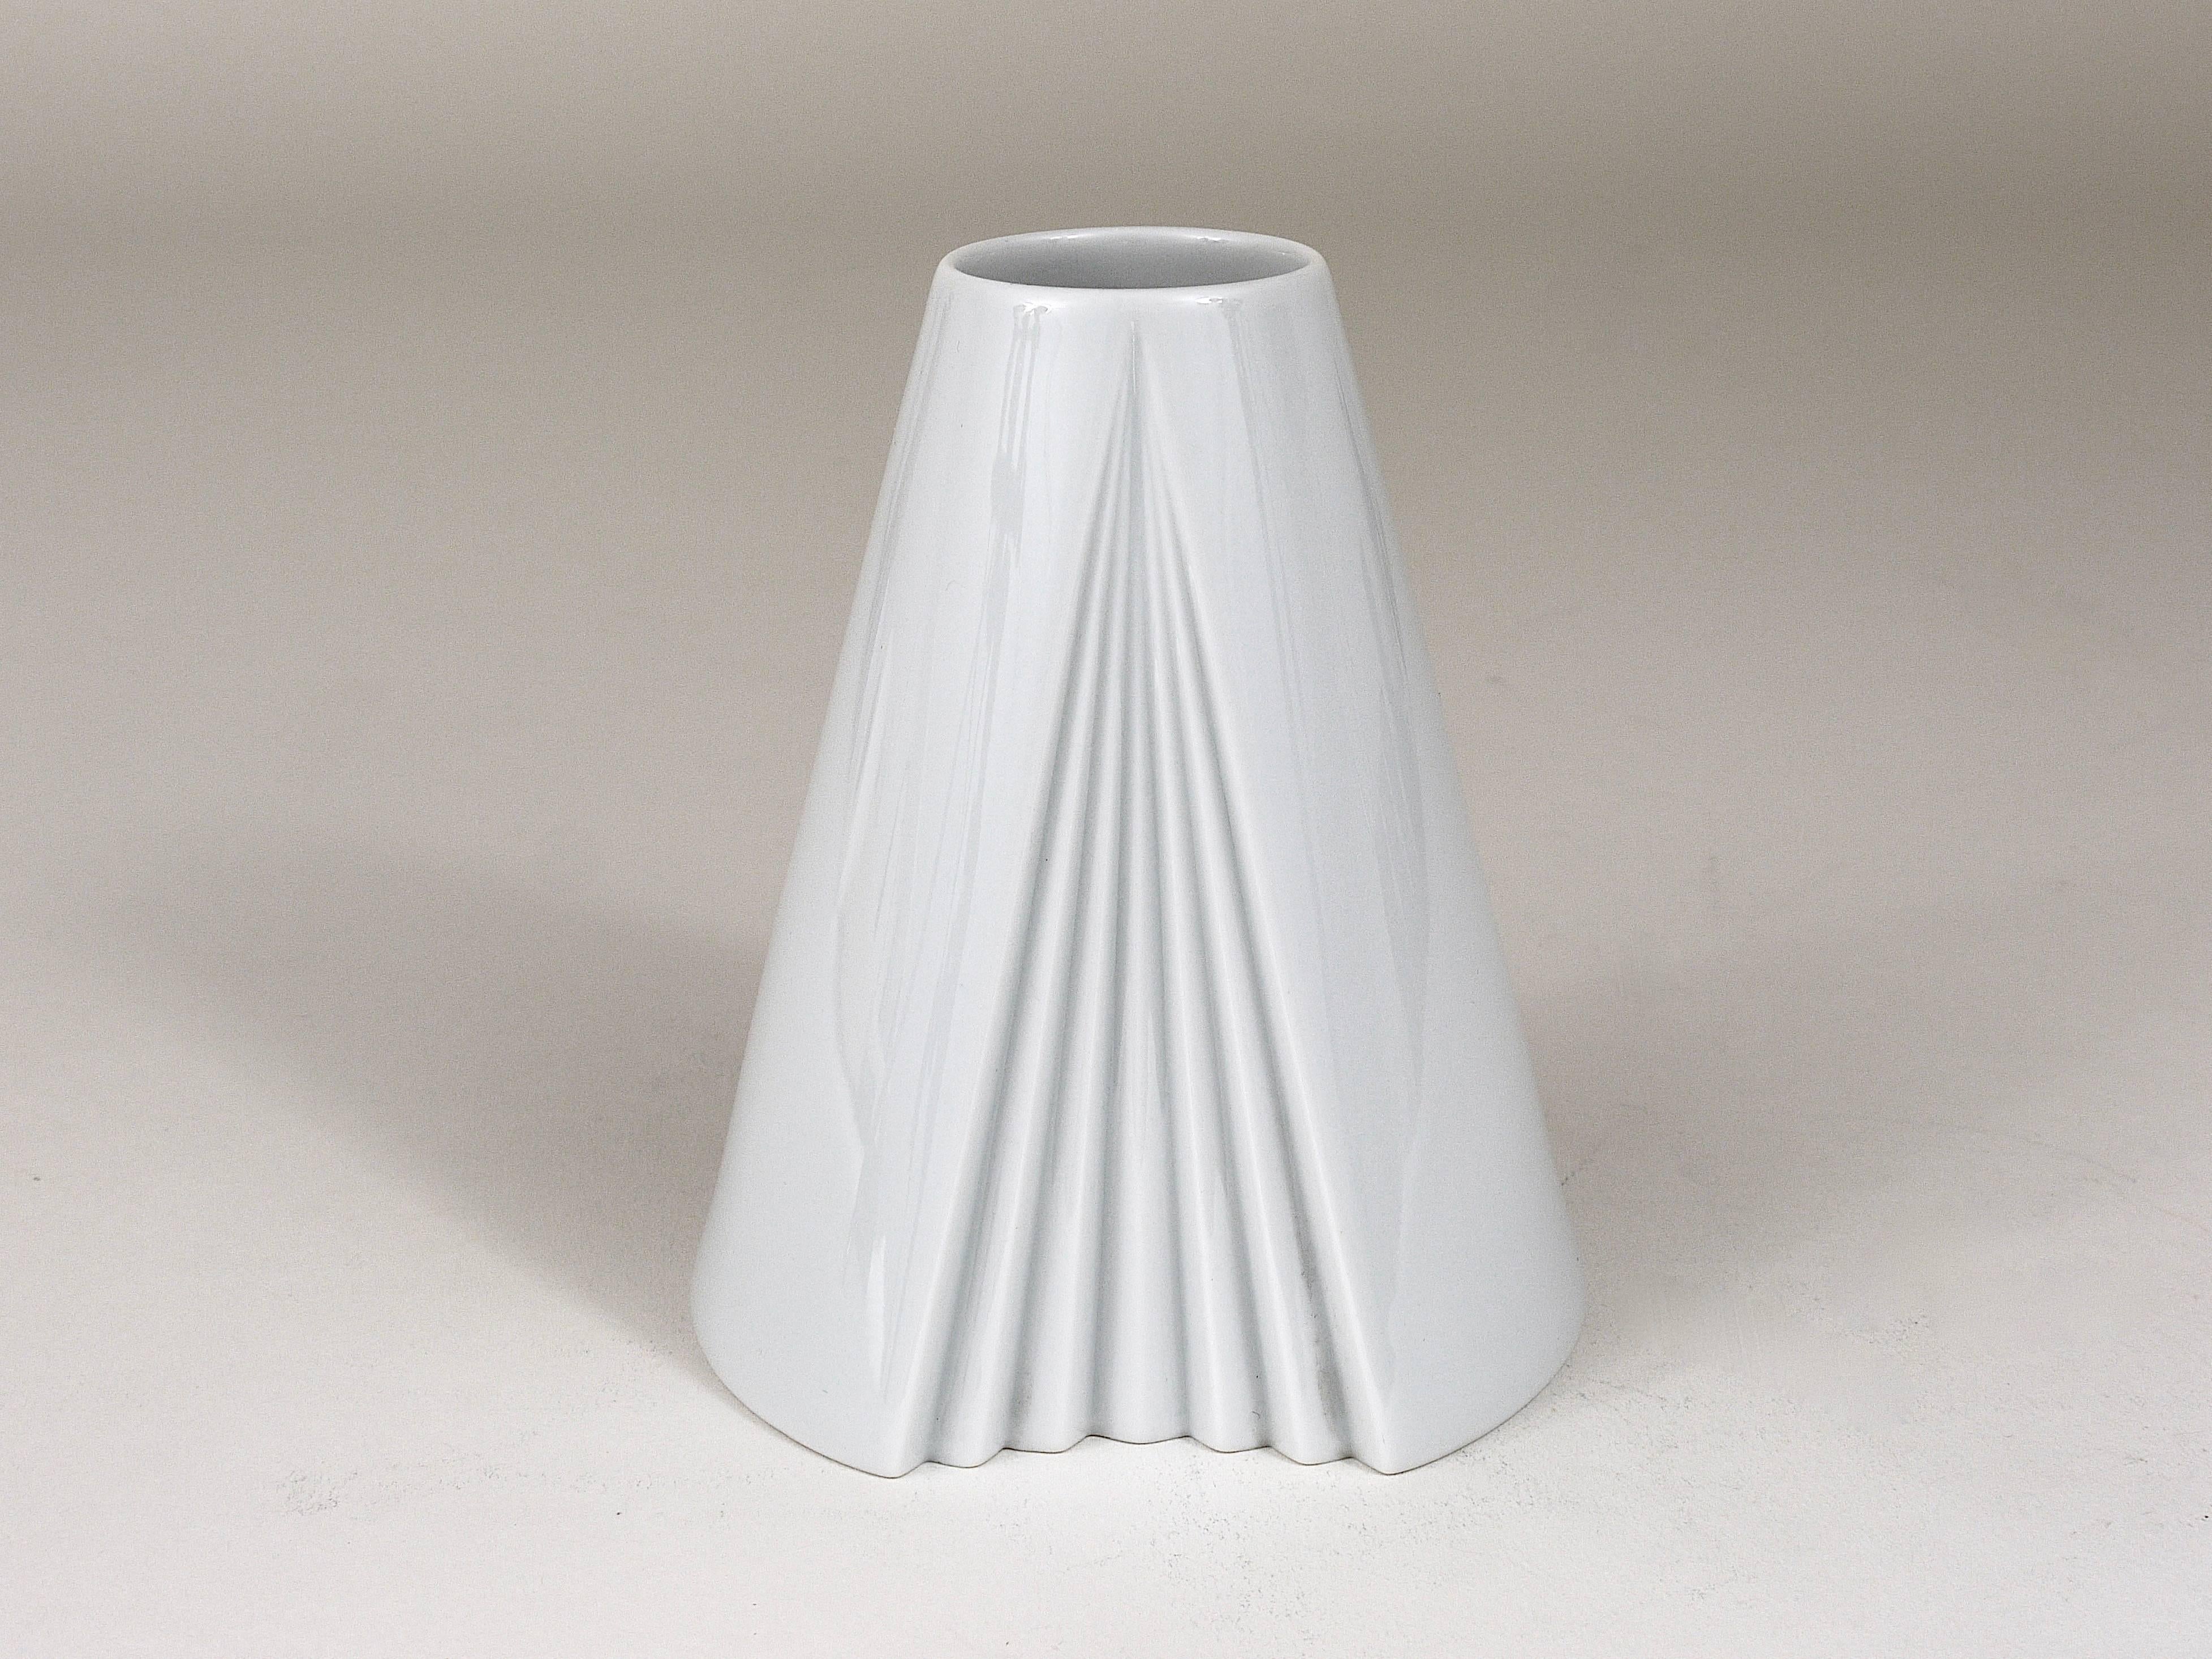 A beautiful white fully glazed cone-shaped porcelain vase Plissee from the 1980s, designed by Ambrogio Pozzi in 1985, executed by Rosenthal, Germany. In excellent condition.